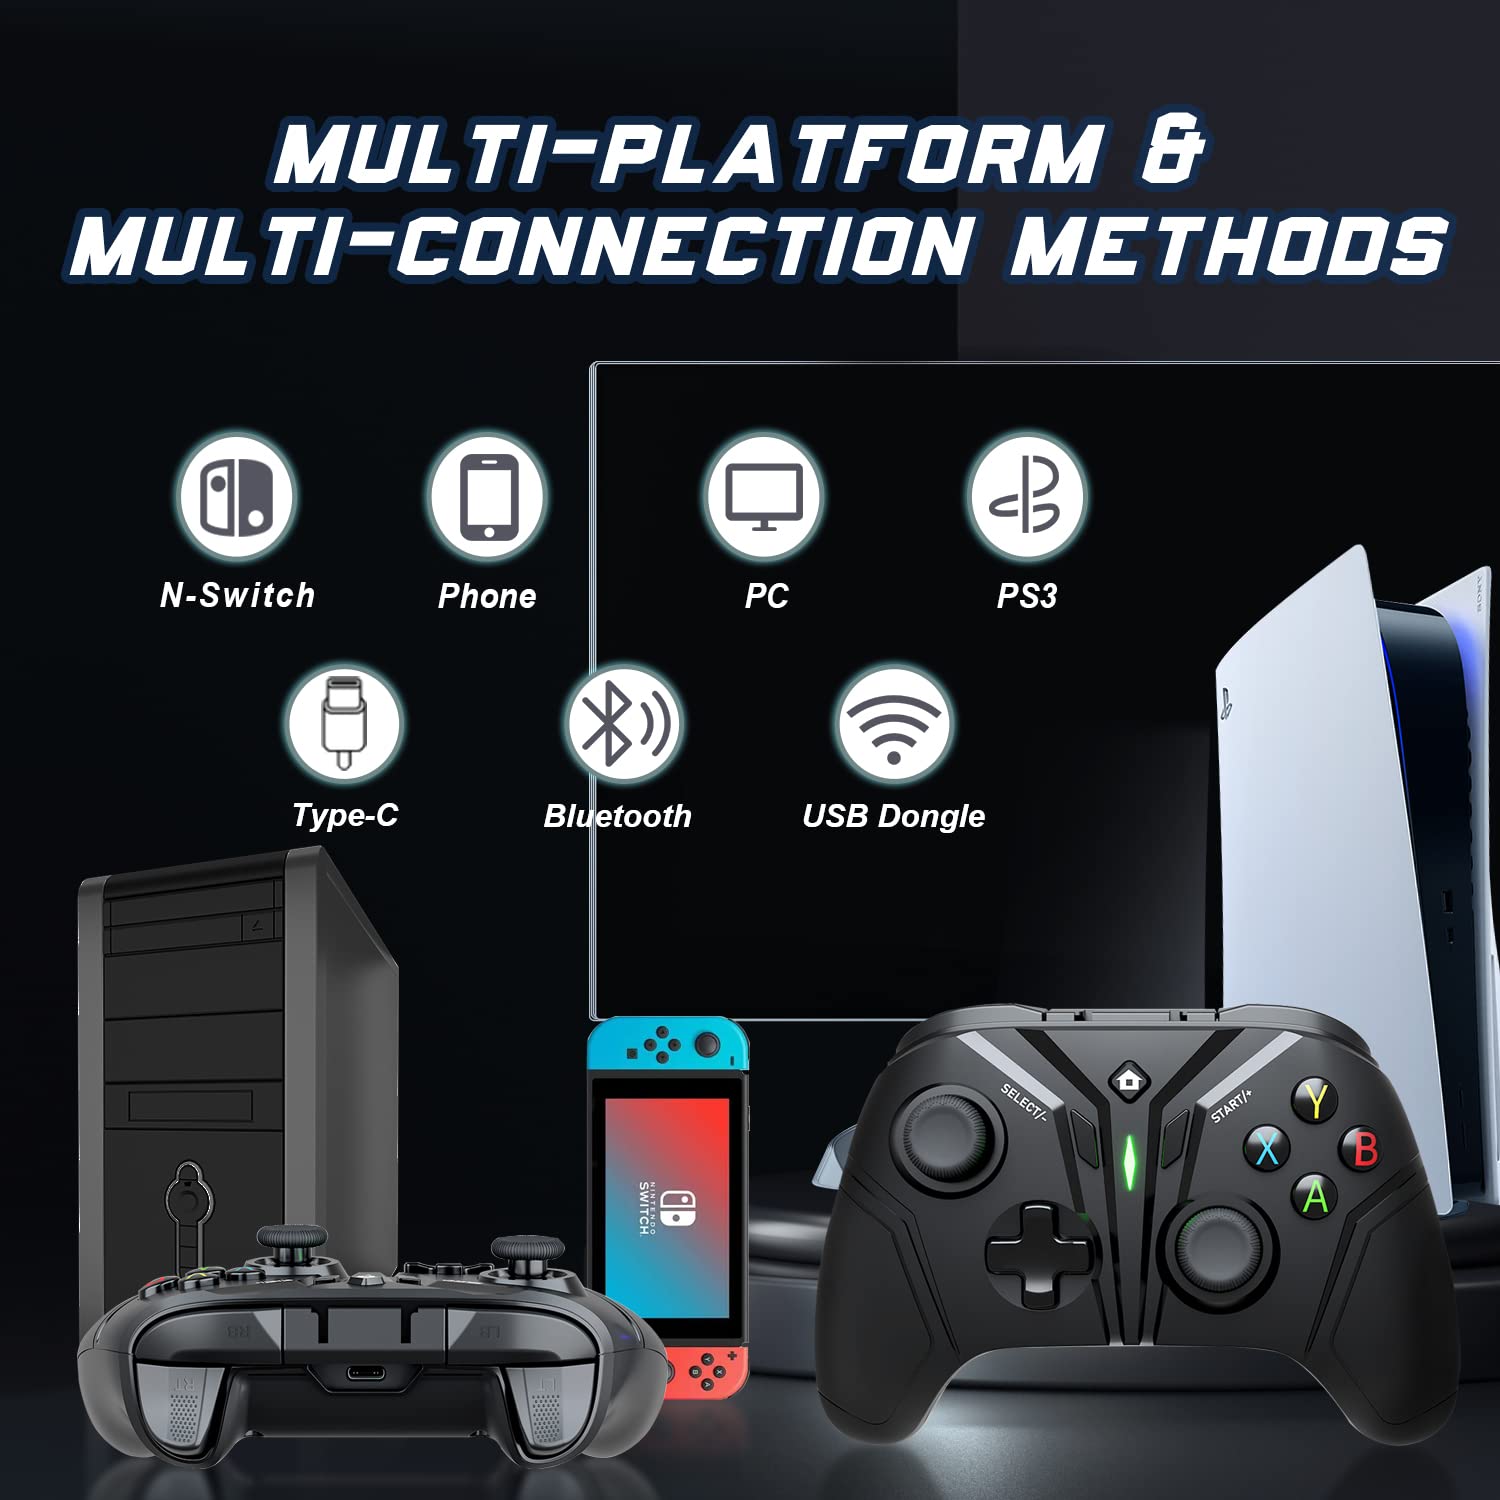 Gamrombo Wireless Pro Controller for Switch/PC/PS3/Android TV, PC Game Controller with Dual Vibration/Gyro Axis, Multi-Platform &Multi-Connections